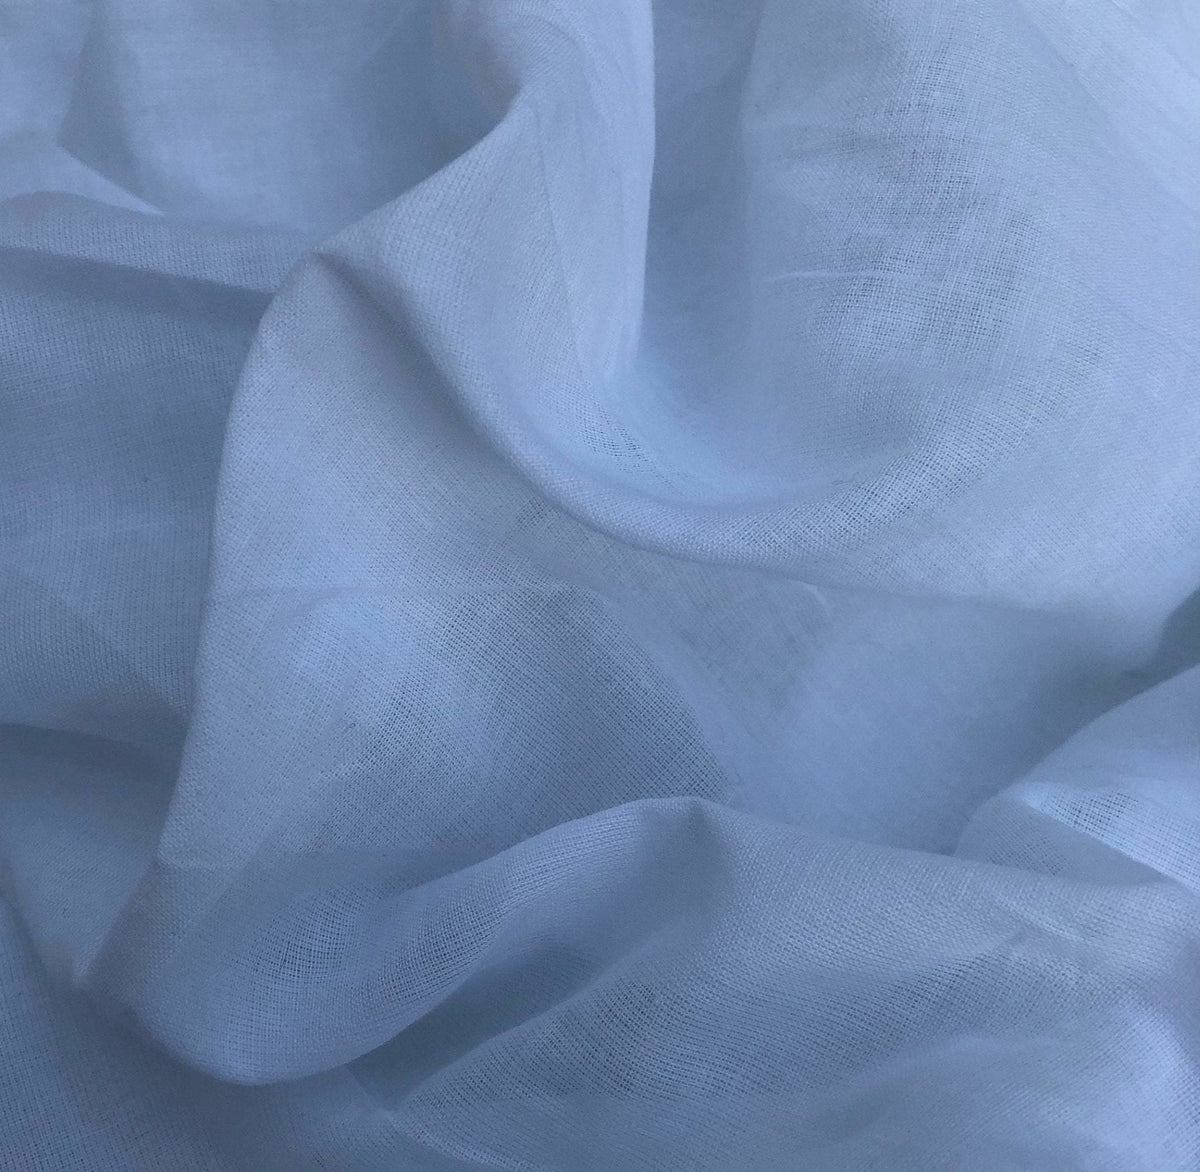 58 White 100% Organic Cotton Voile Woven Fabric By the Yard